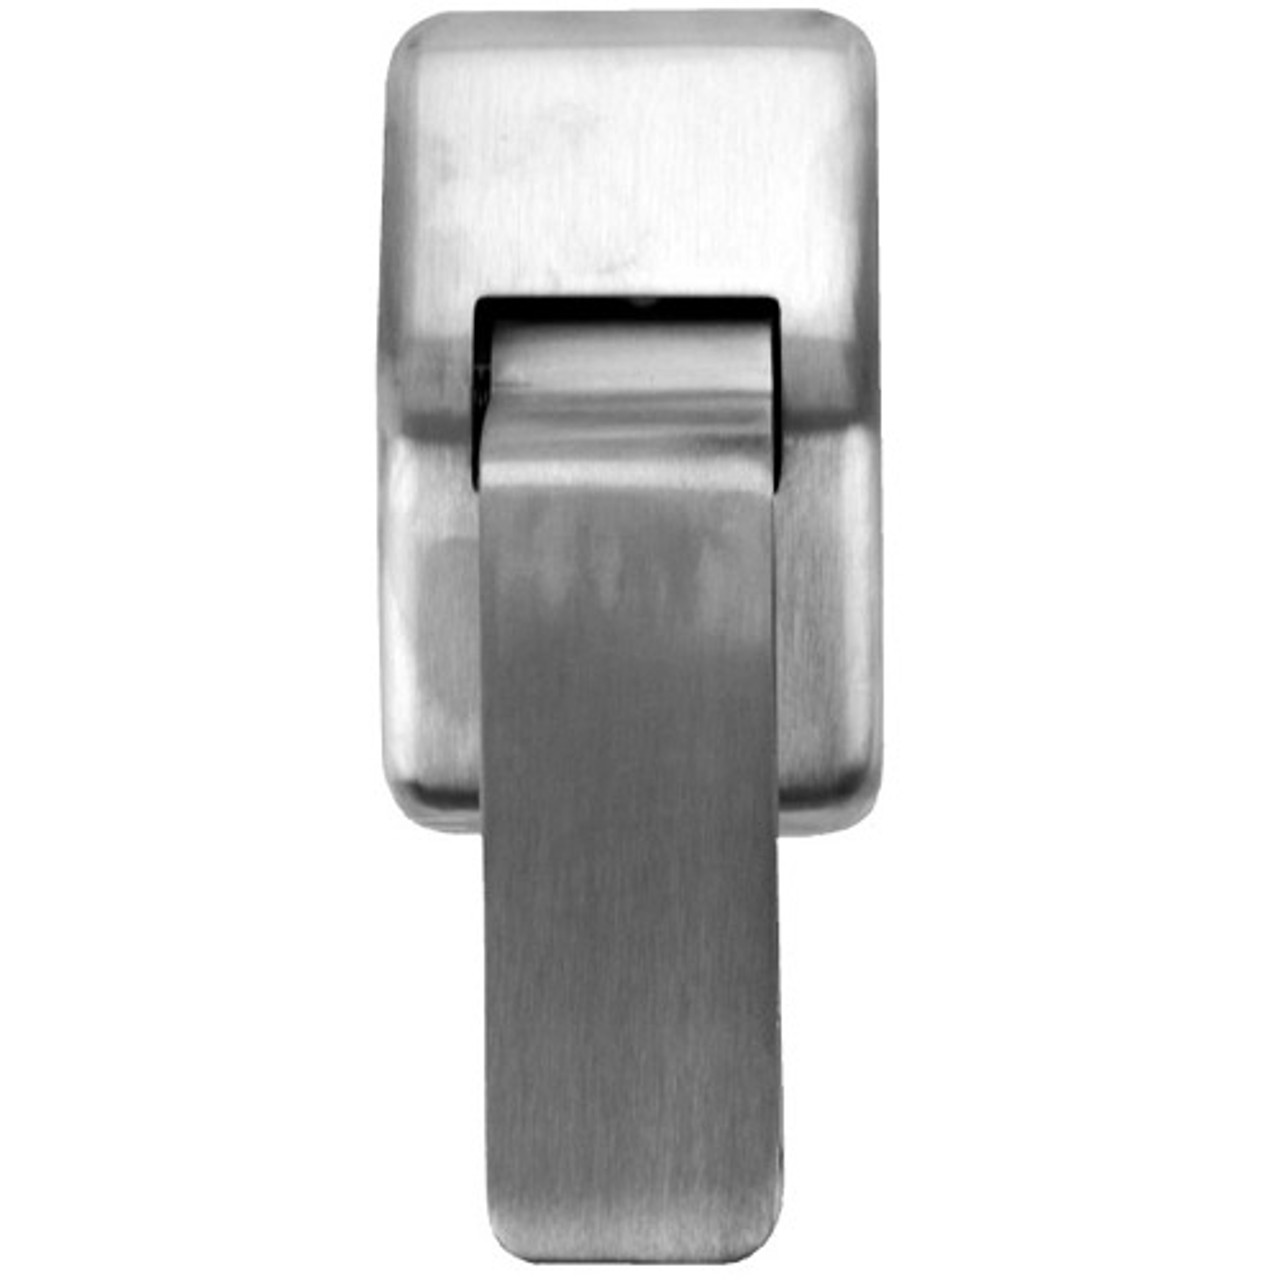 4500-630 Don Jo Hospital Latch in Satin Stainless Steel Finish